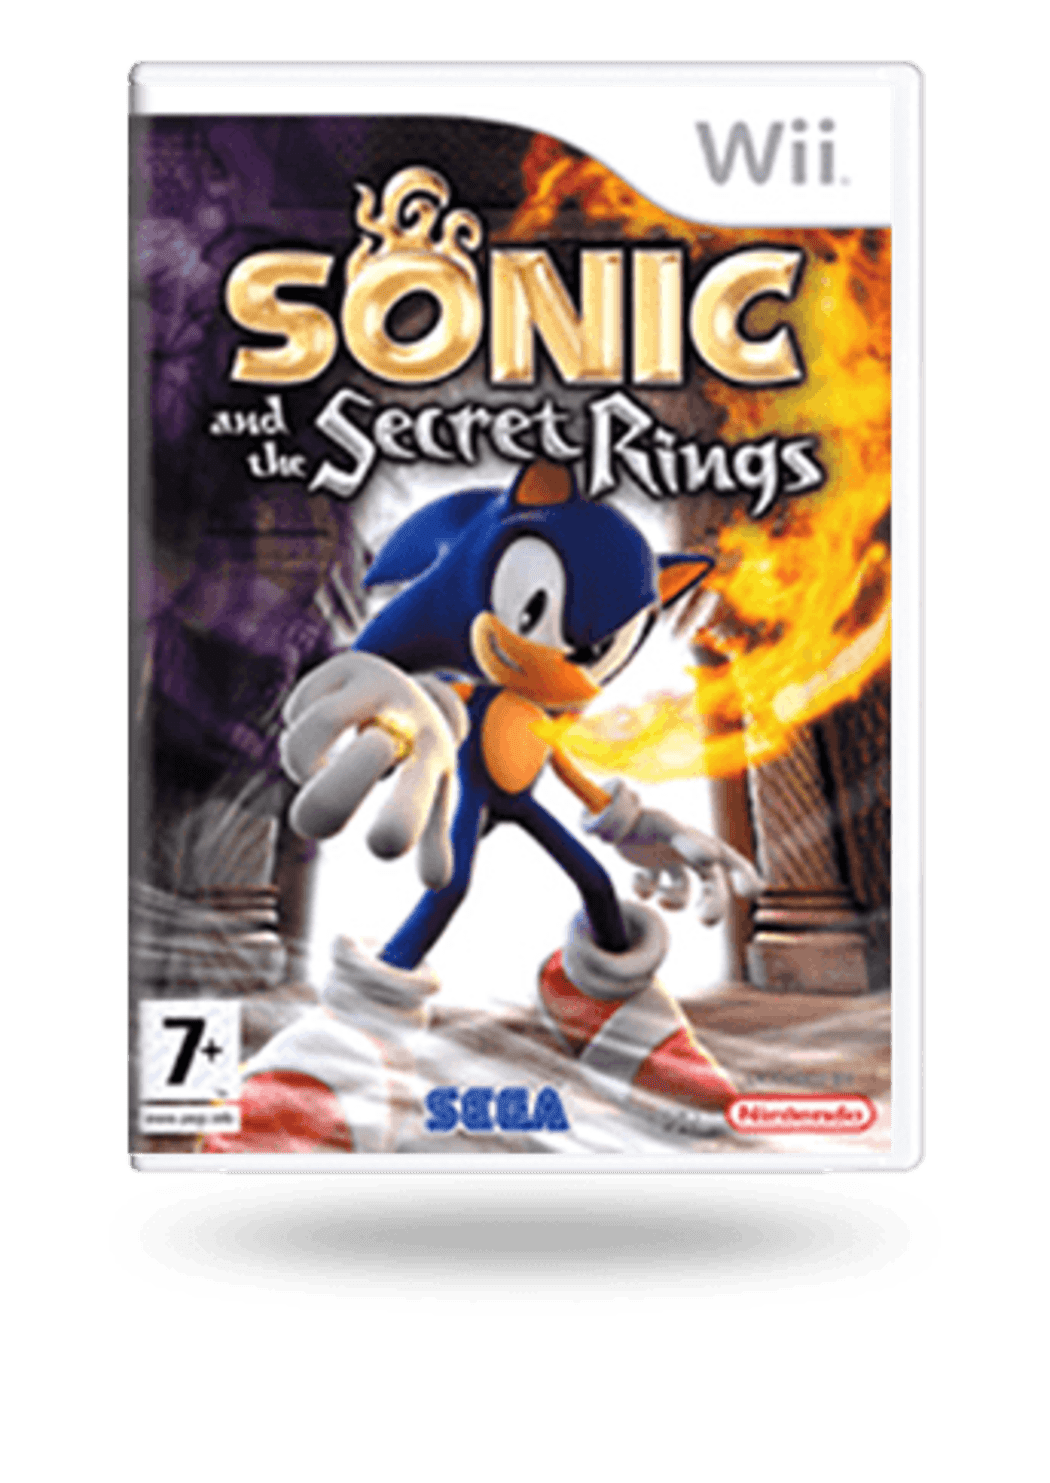 Buy Sonic and the Secret Rings - Nintendo Wii Online at Low Prices in India  | Video Games - Amazon.in